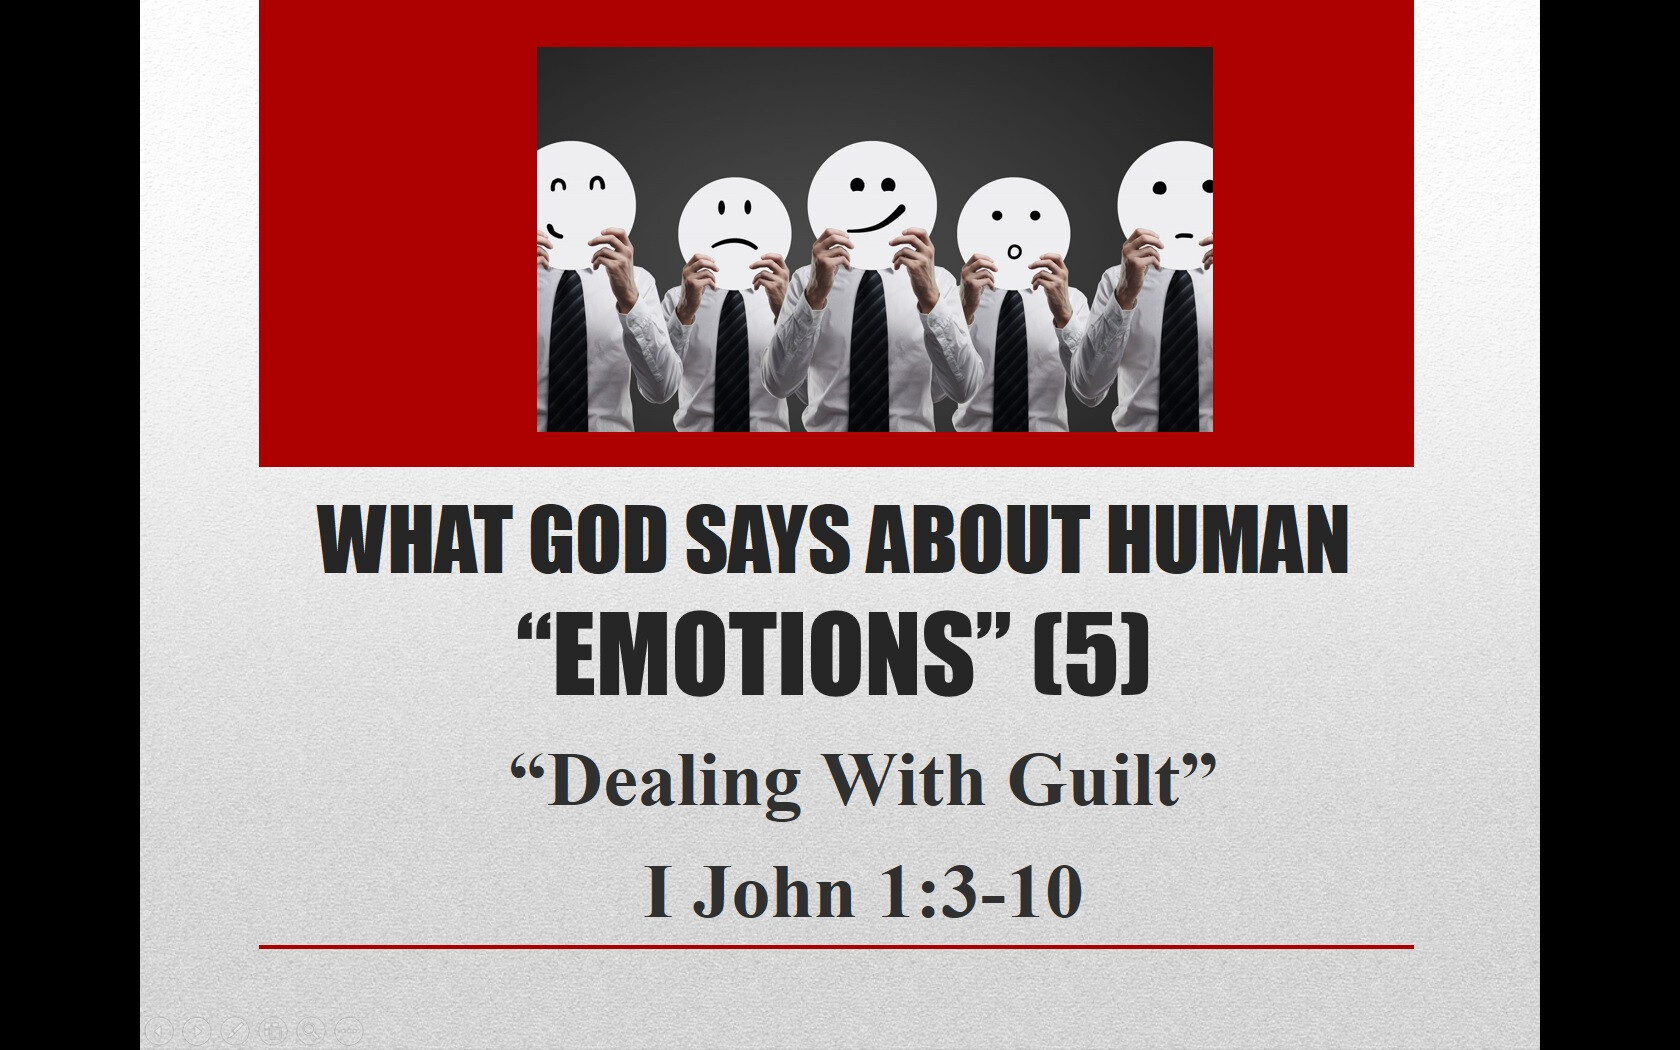 Dealing With Guilt